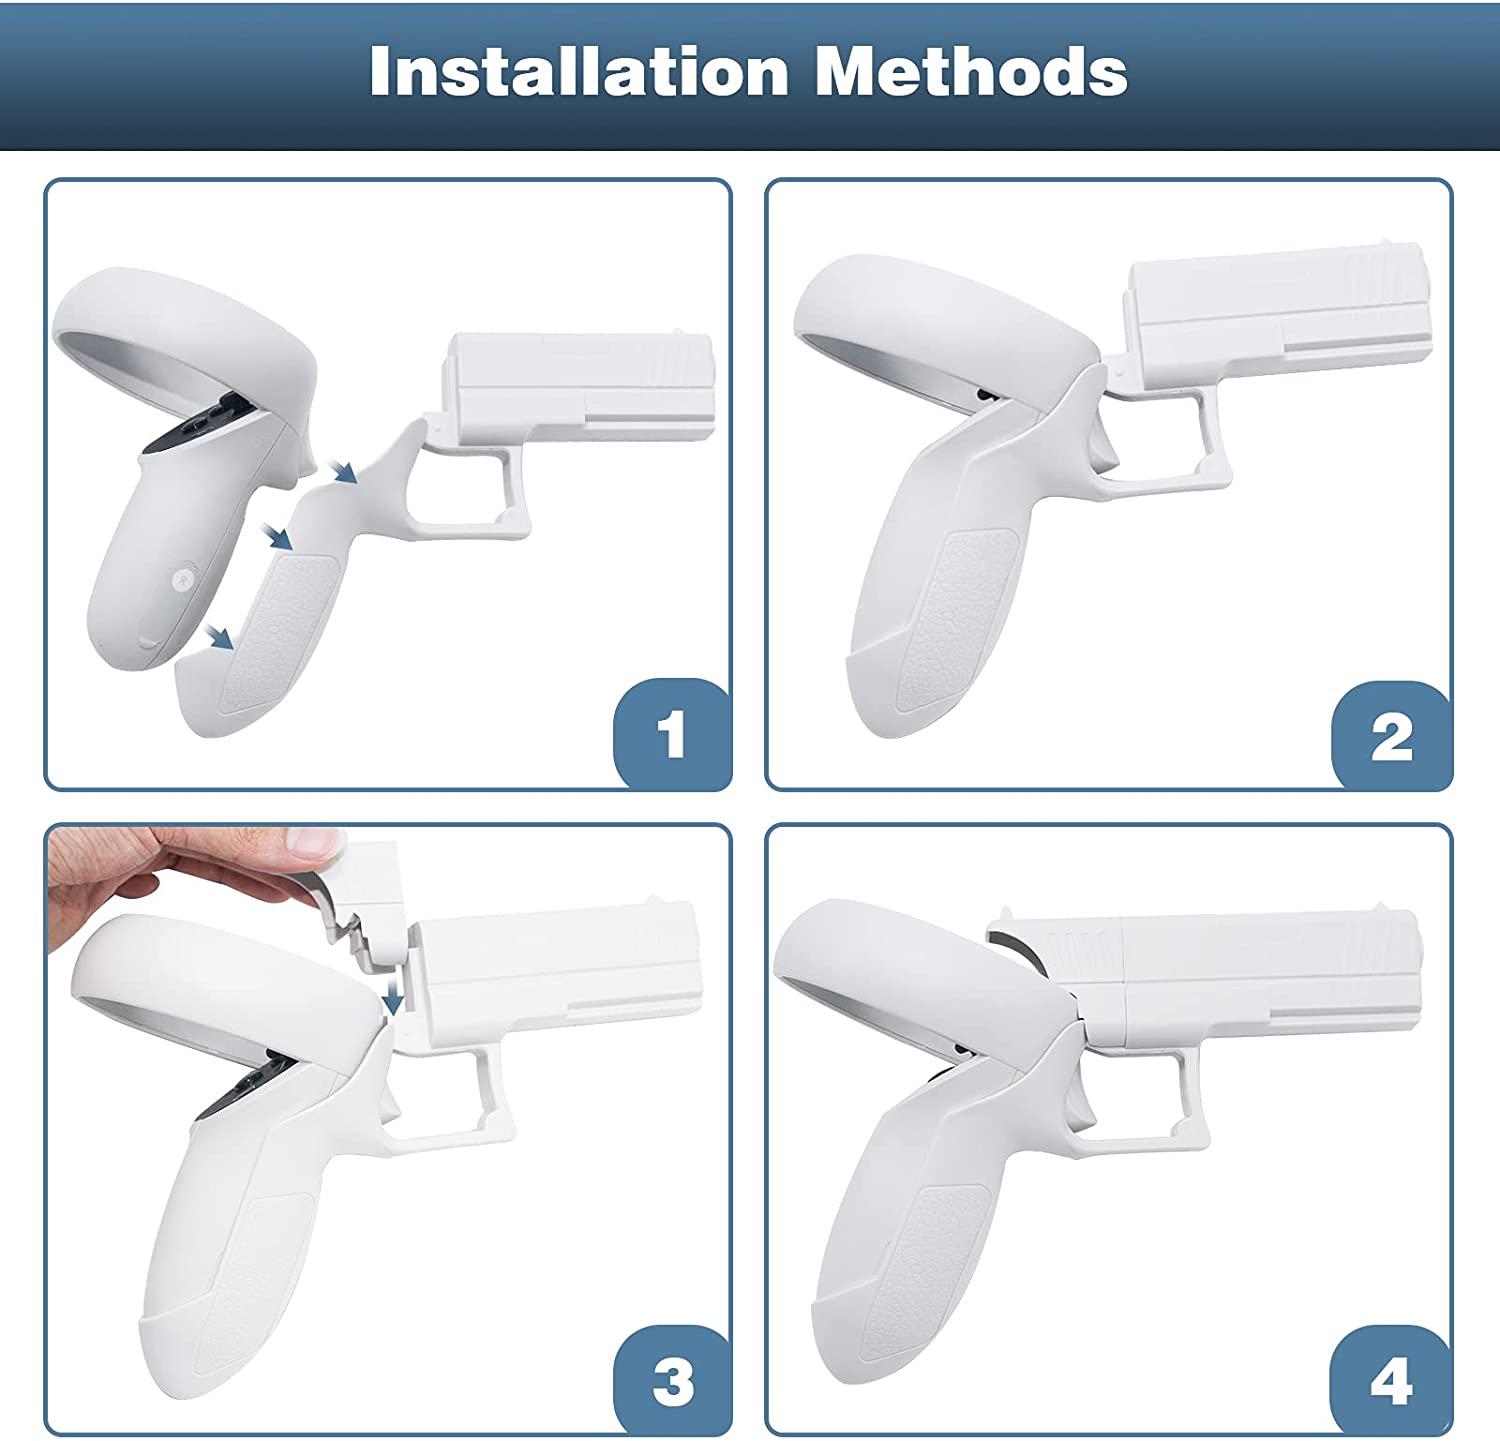 Step-by-step installation guide for this Grip Cover, providing detailed demonstrations.